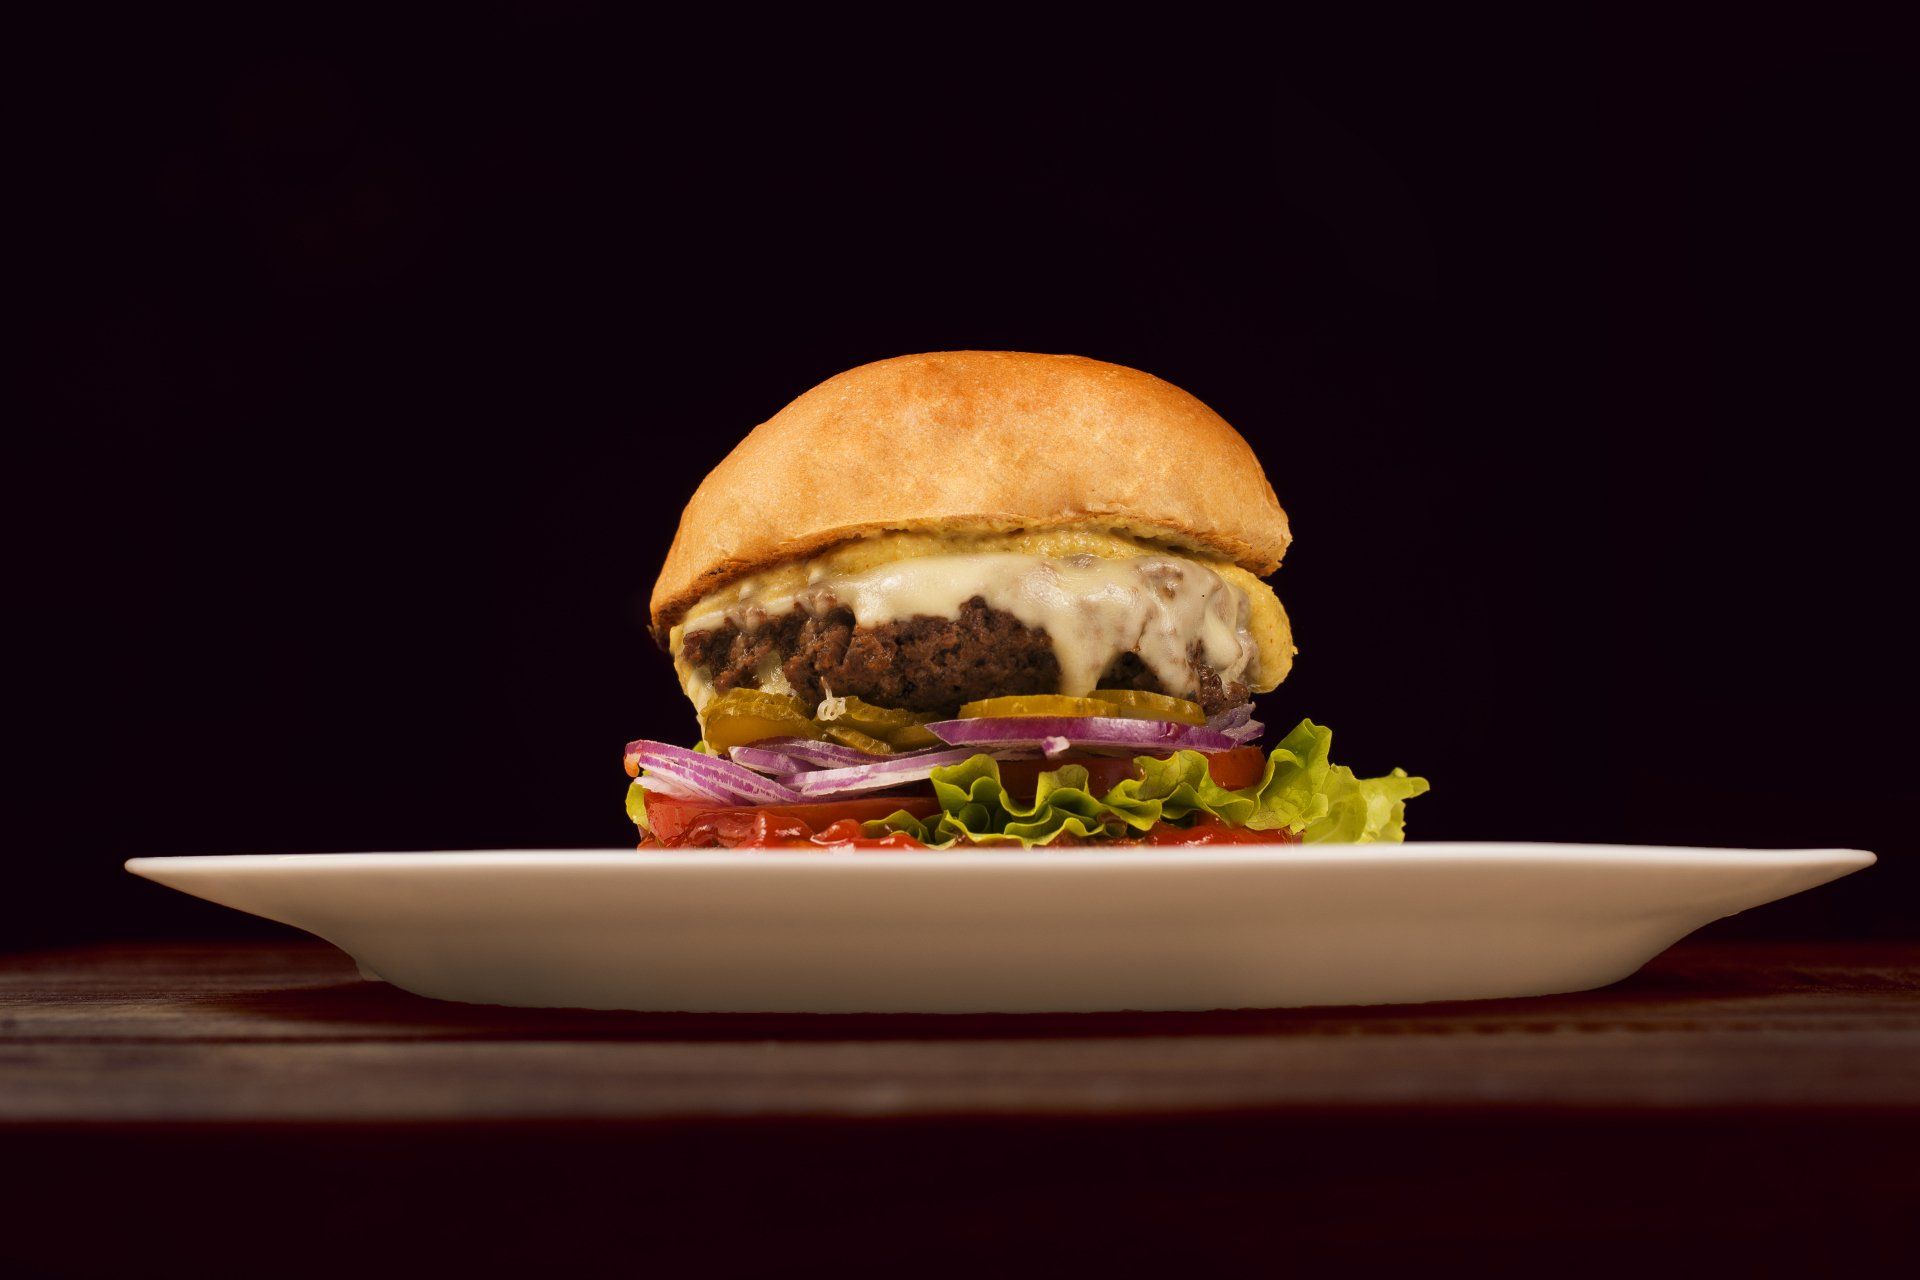 A hamburger is on a white plate on a wooden table.